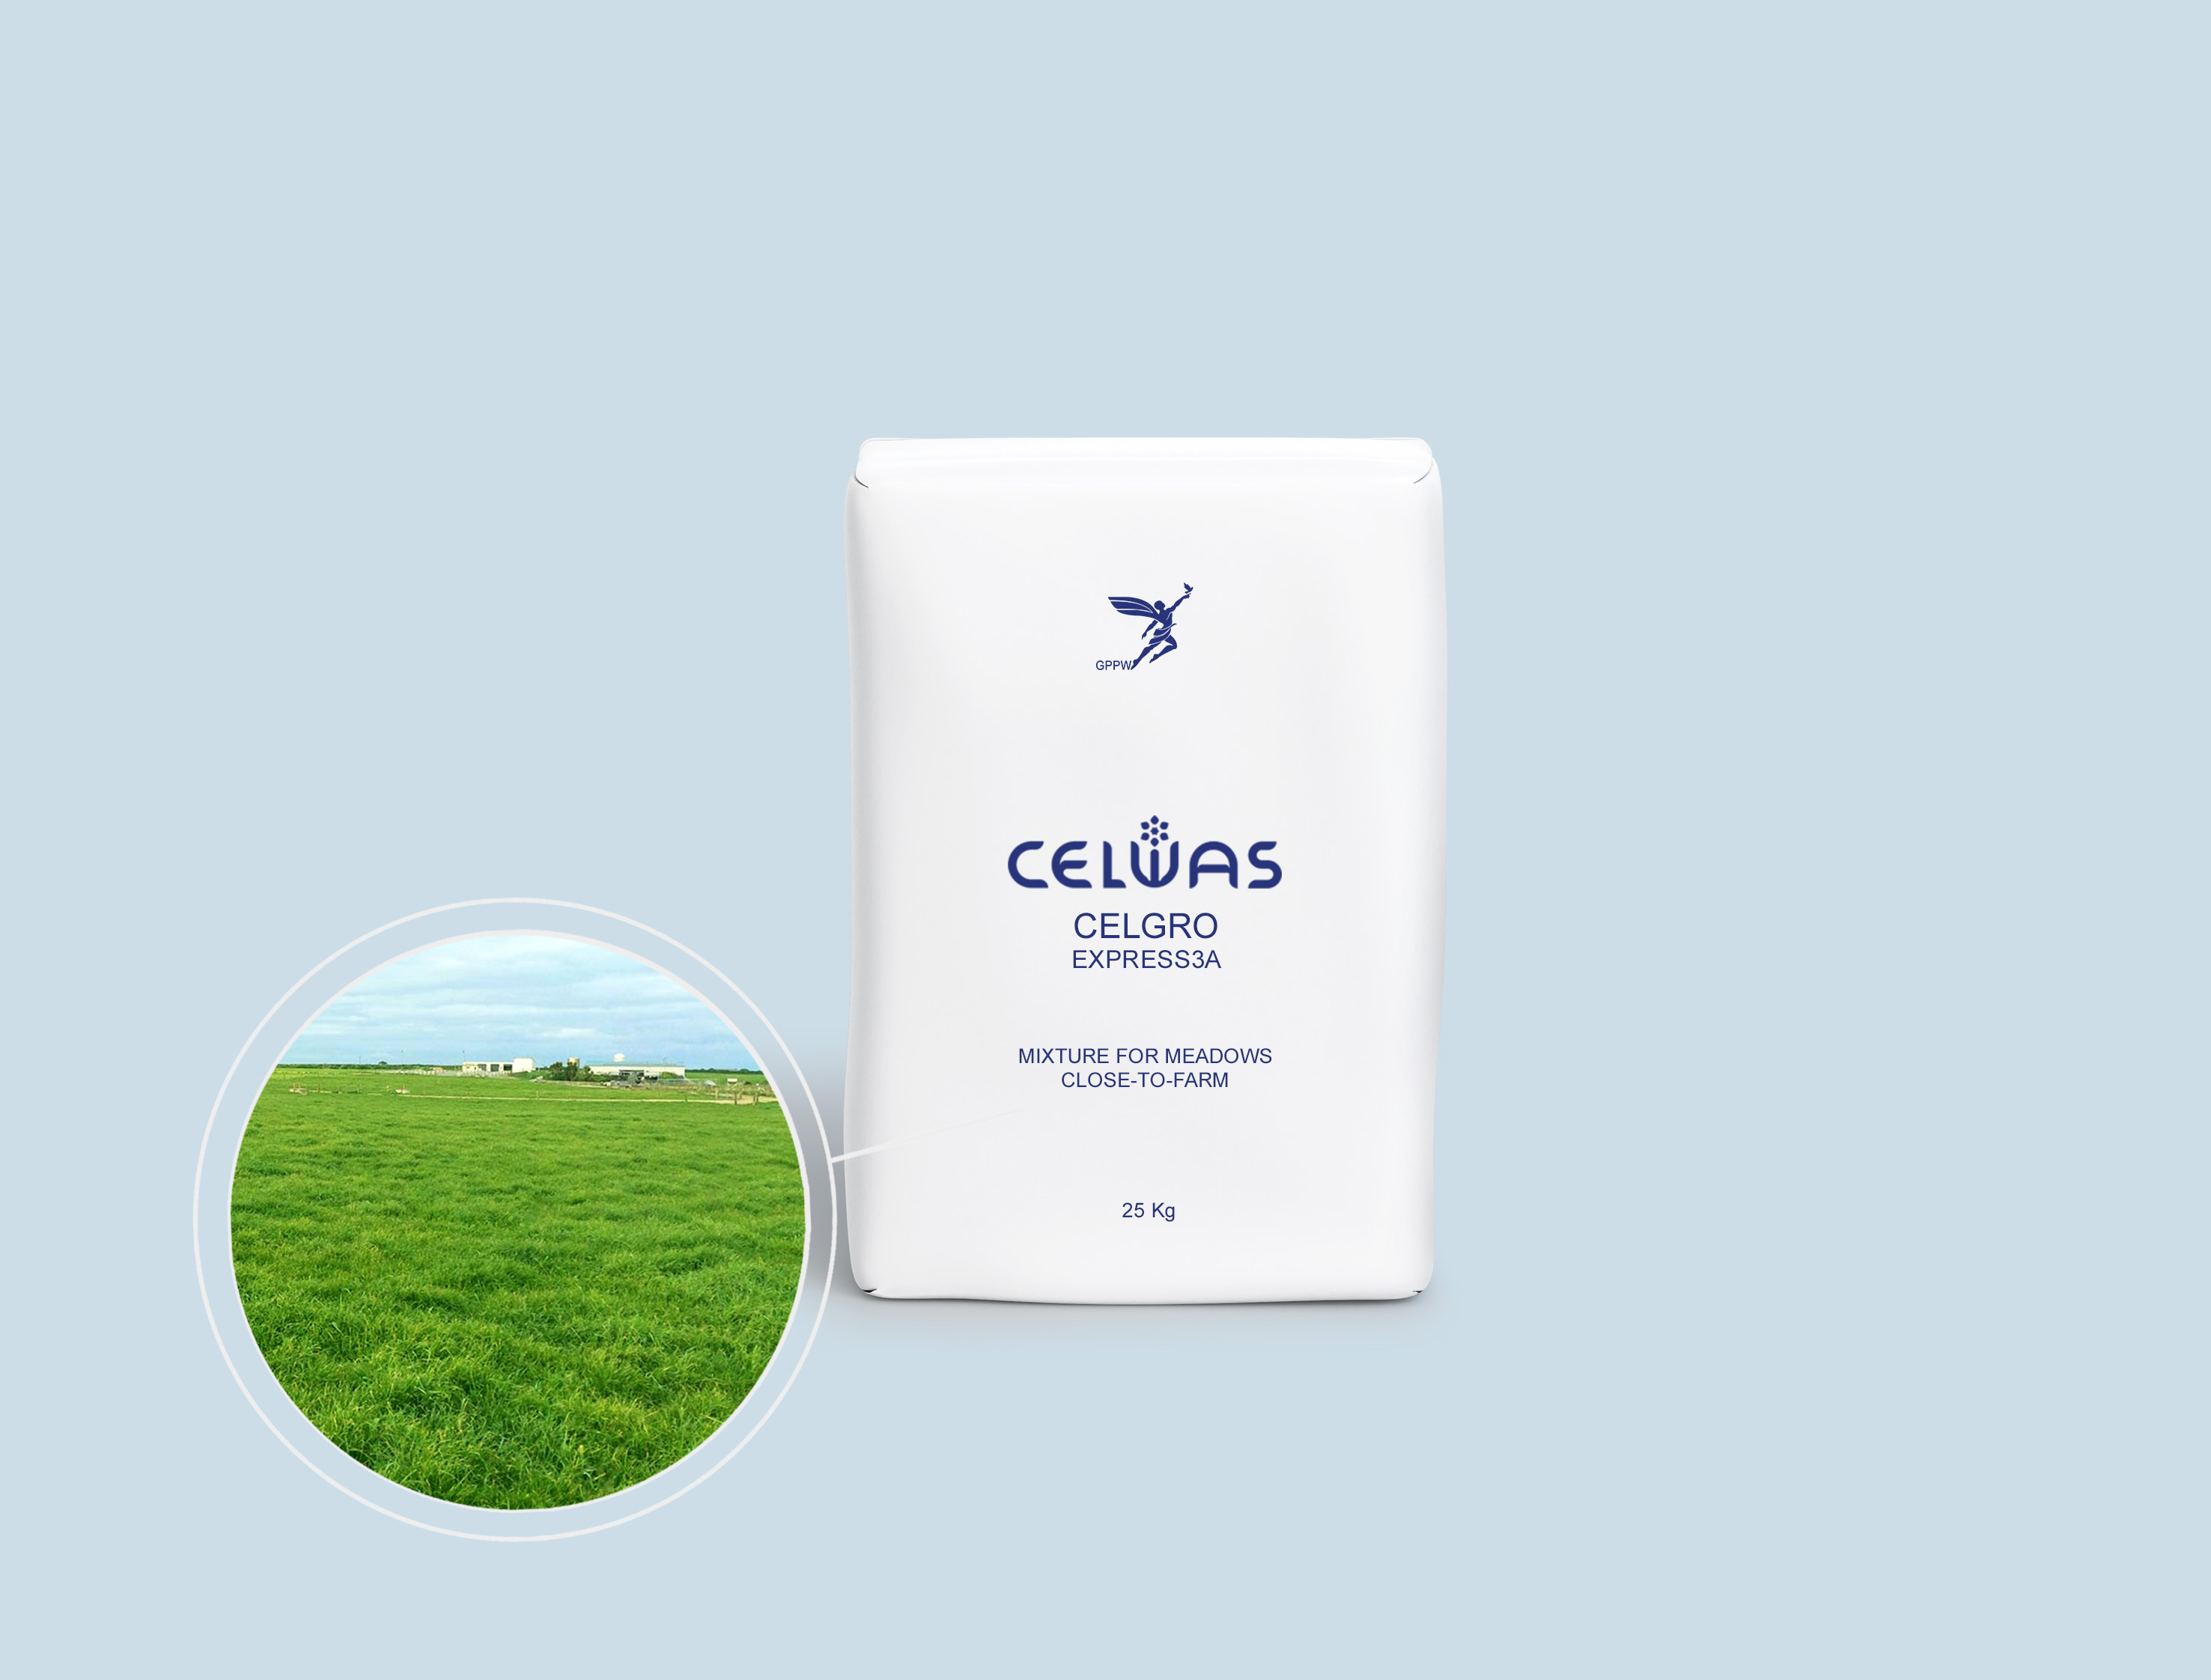 CELGRO EXPRESS3A<br/> fodder grasses and legumes